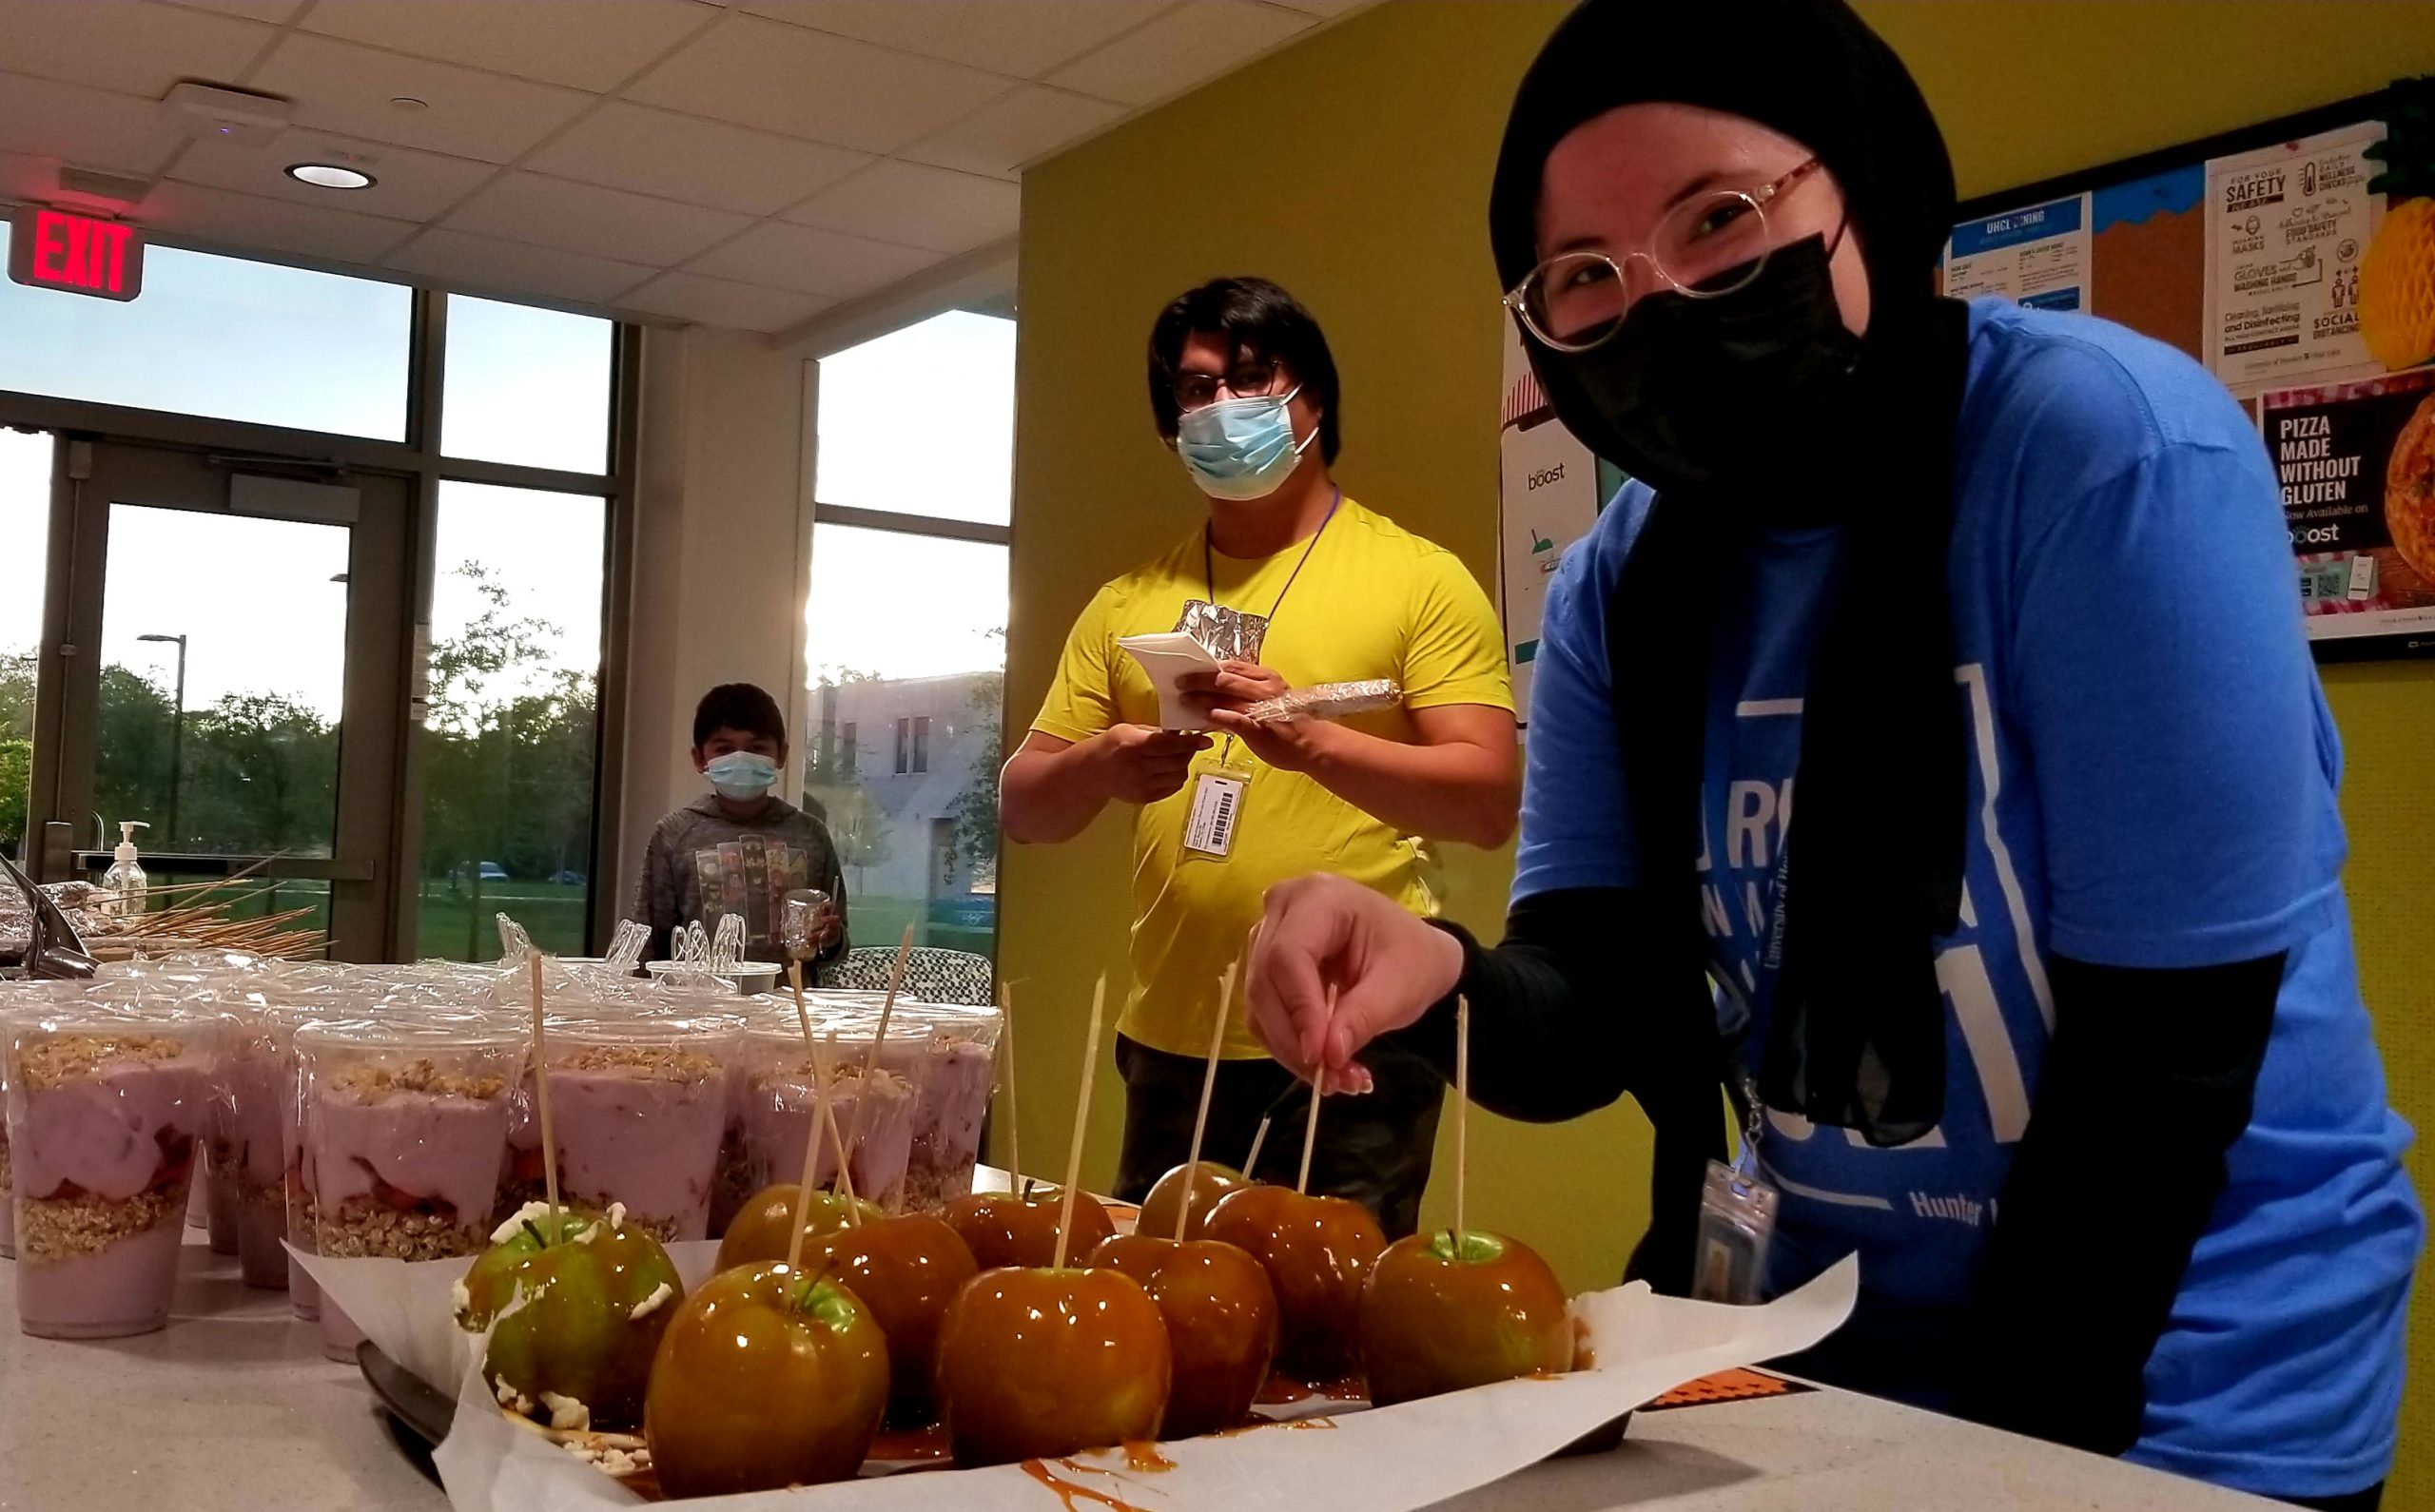 PHOTO: Hunter Hall residents Dylan Bucio (left) and Biancarosa Vargas (right) served caramel apples and parfaits, among other foods for the carnival event held to celebrate residents’ return to the hall. Photo courtesy of UHCL Student Housing and Residence Life.